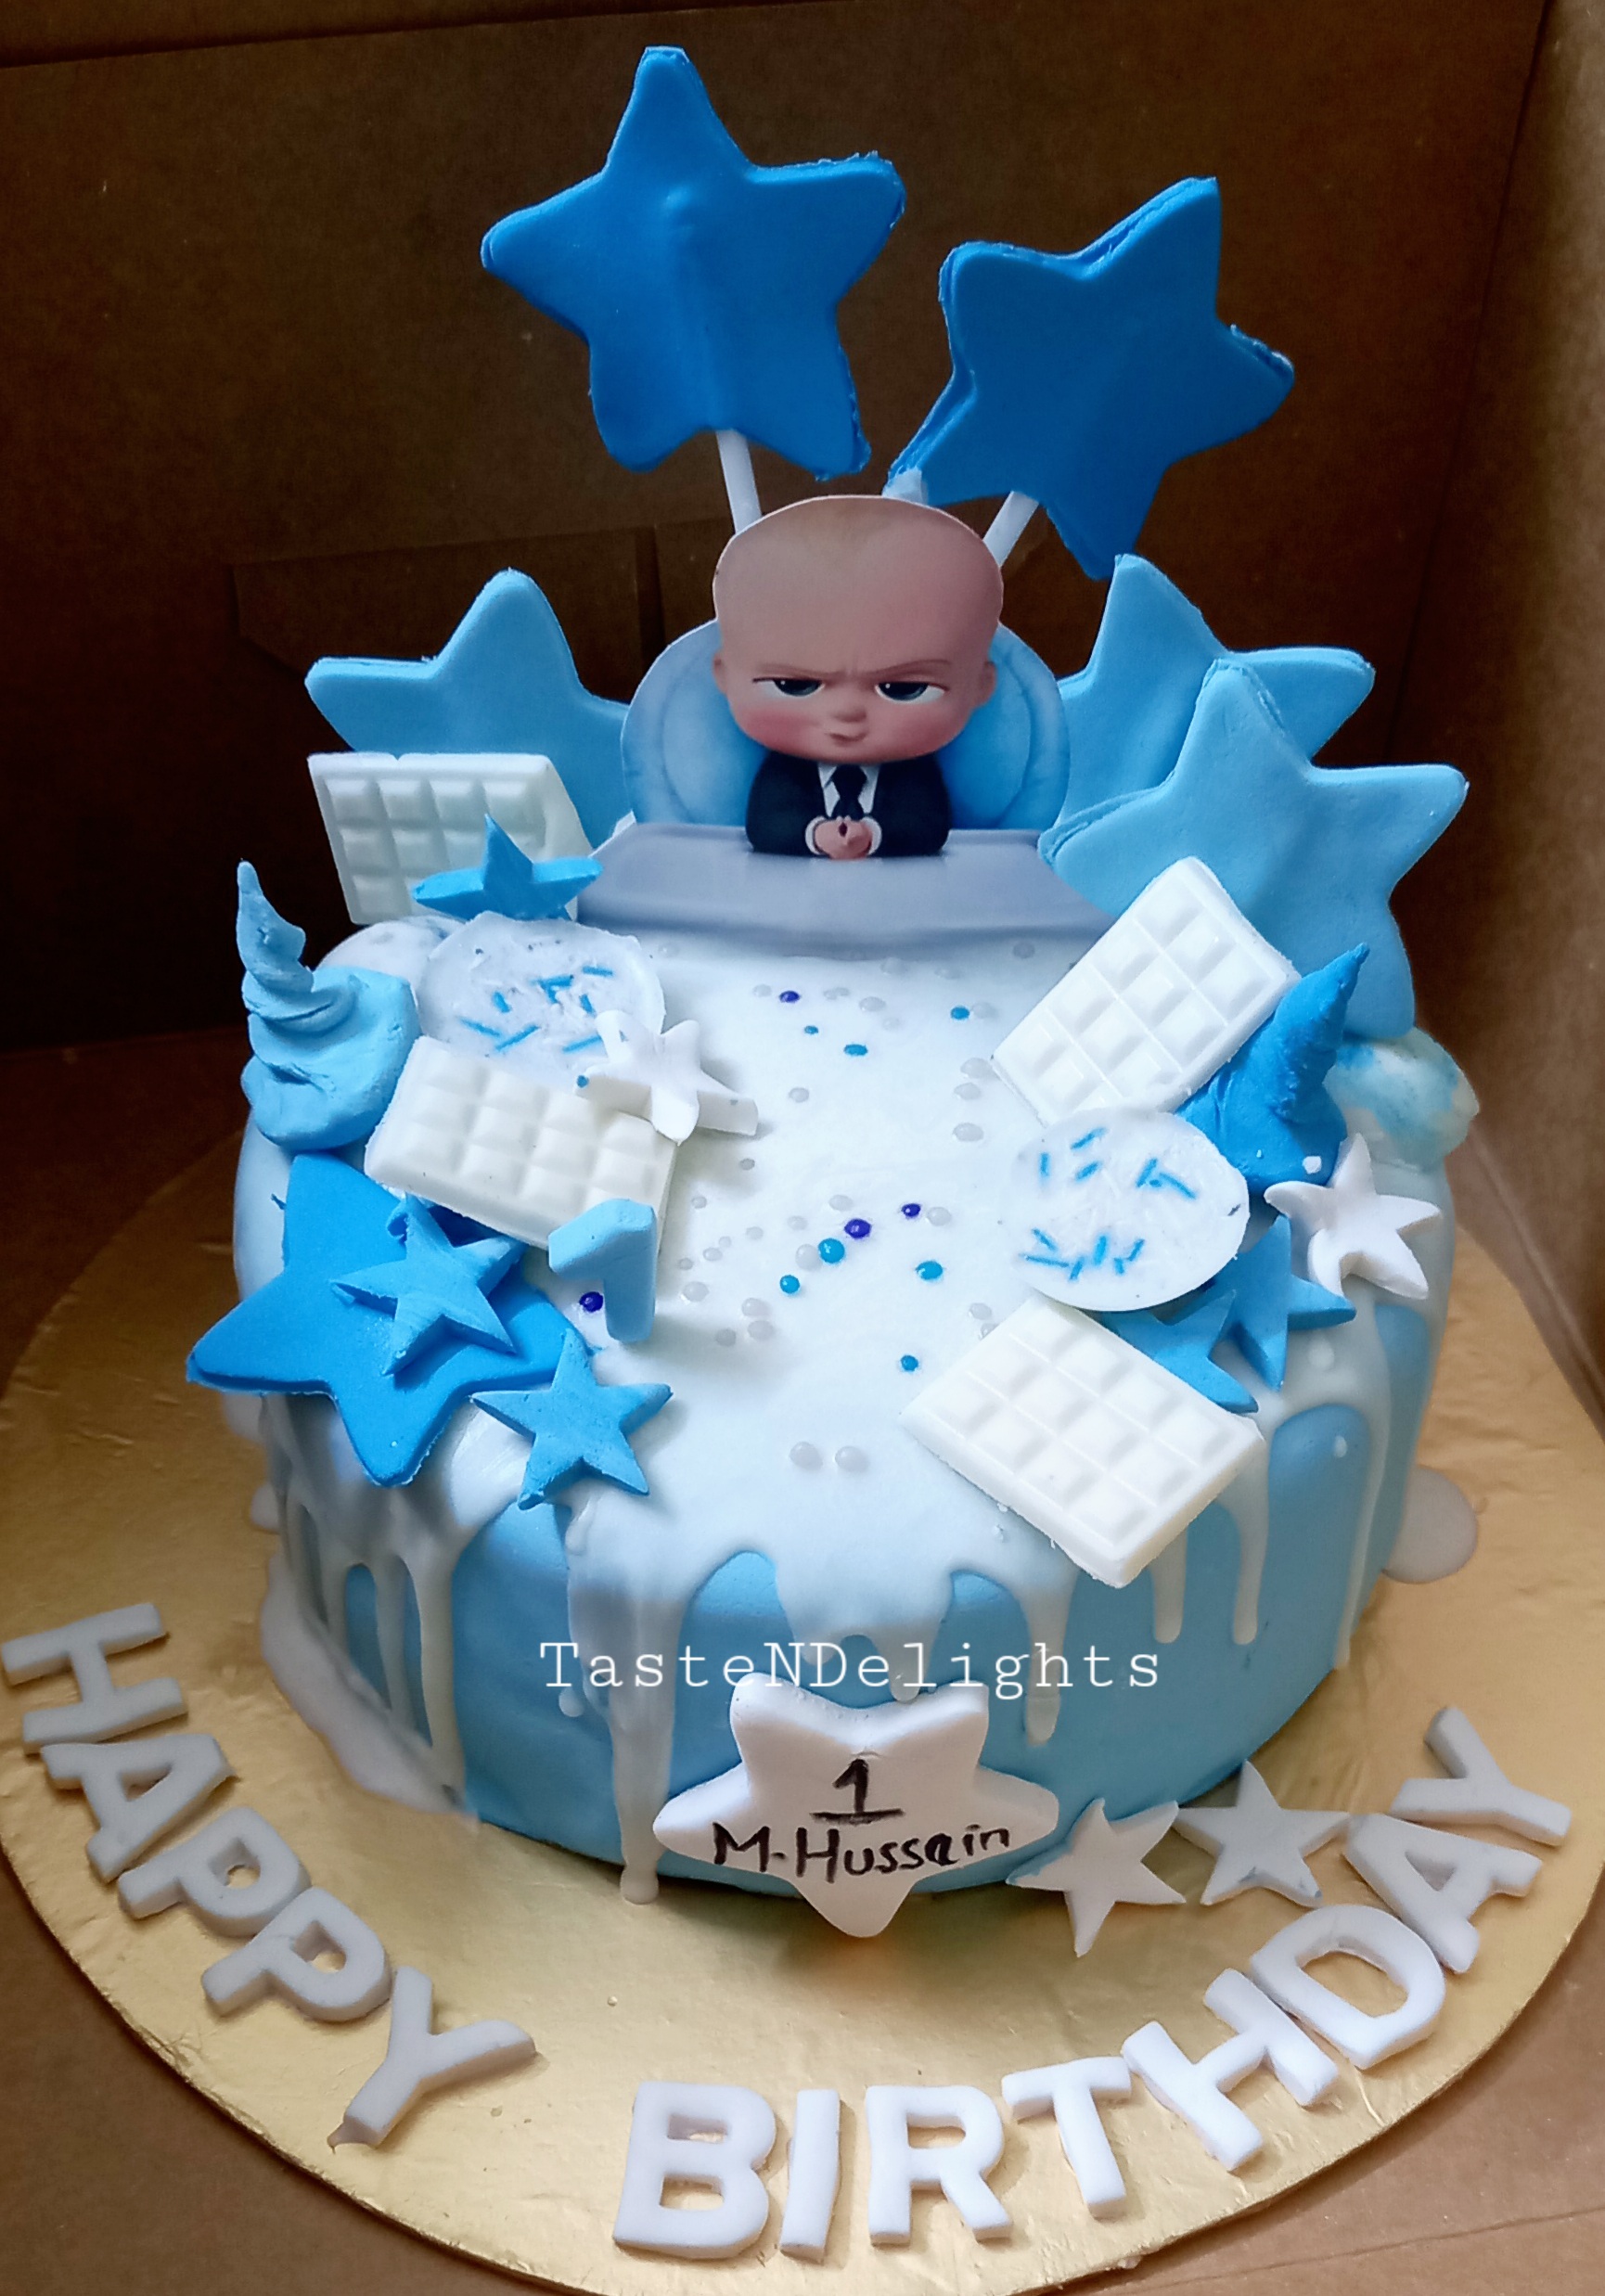 Baby and Working mother theme cake - Customized Cakes Ideas in Noida –  Creme Castle